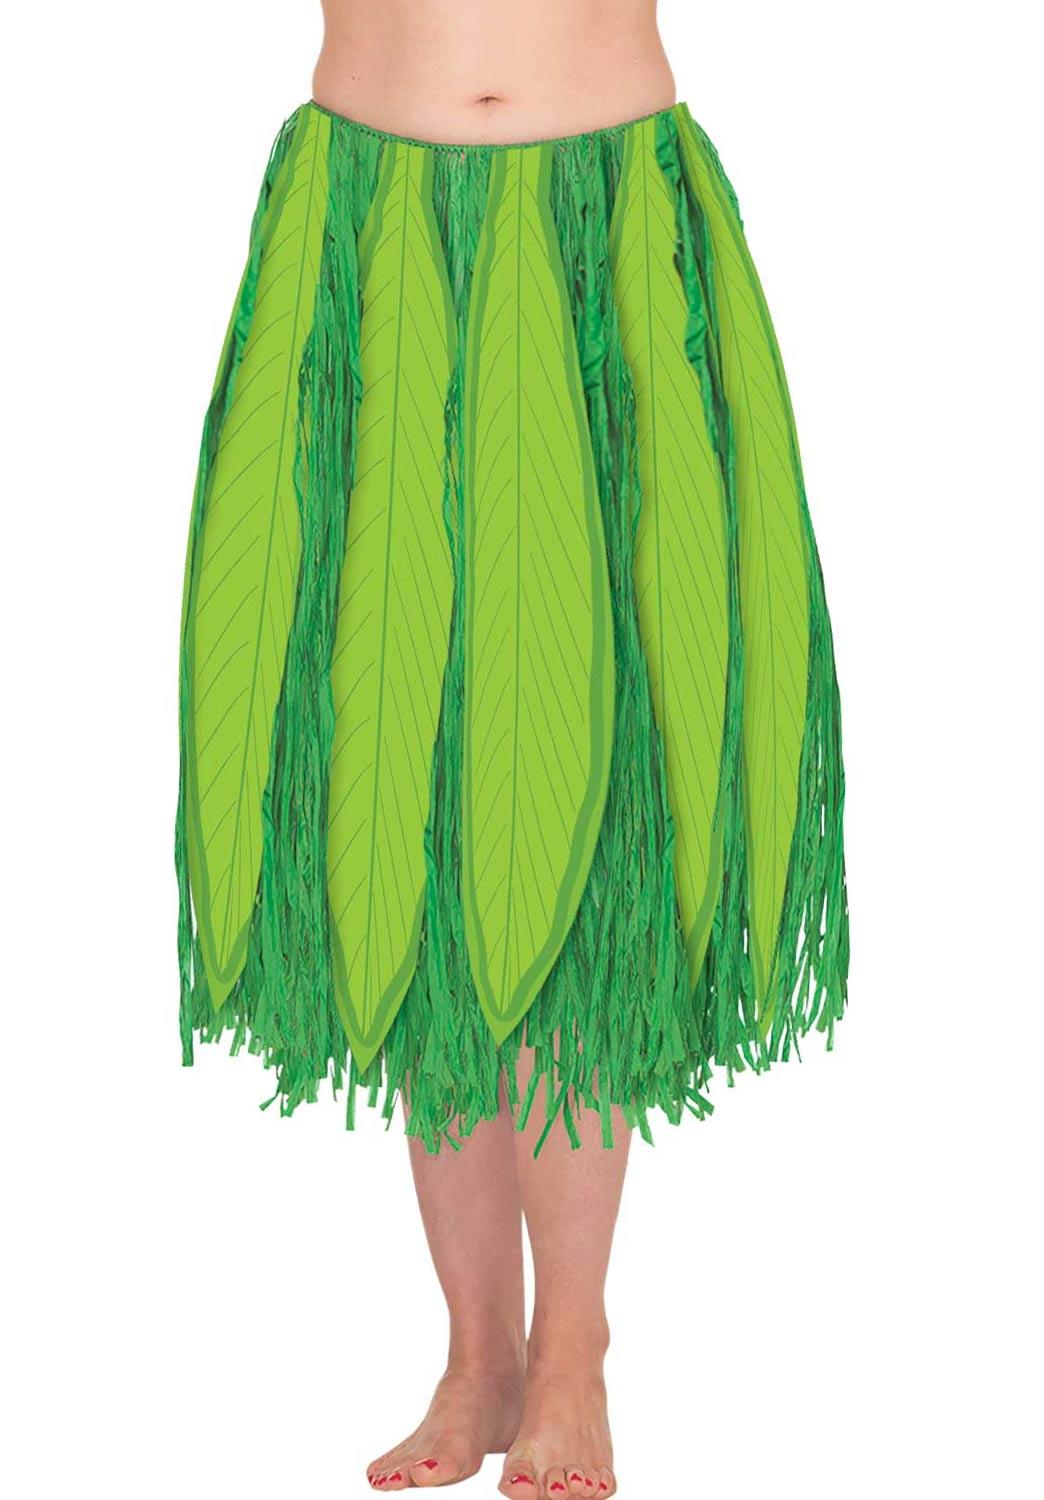 Hawaiian Adult Palm Leaf Skirt by Amscan 340191 available from a collection here at Karnival Costumes online party shop